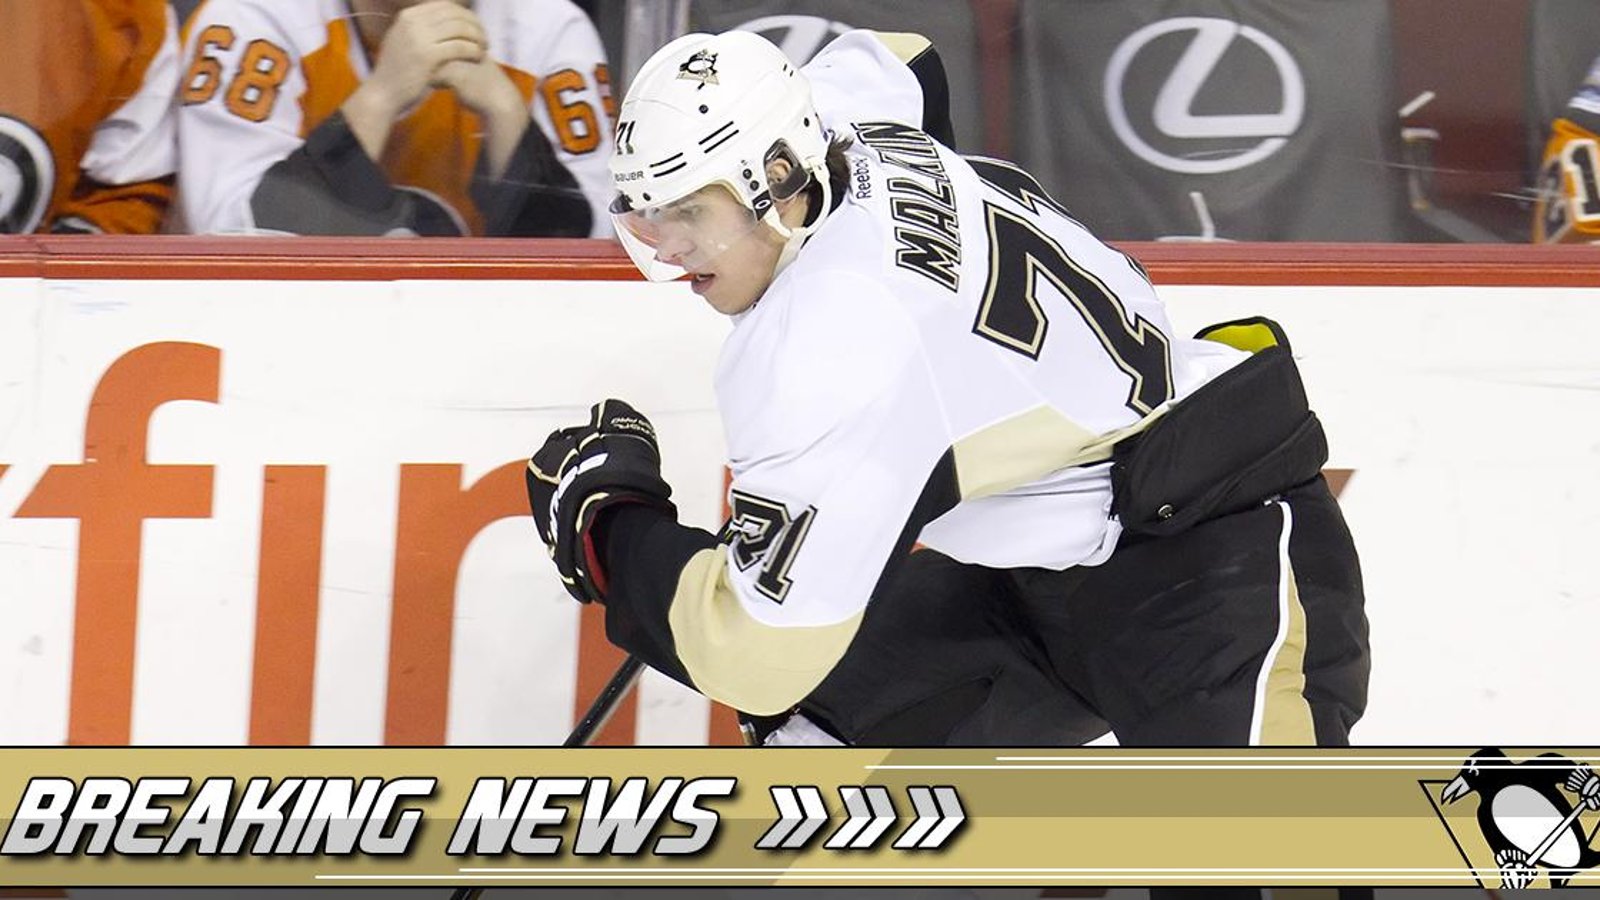 Breaking: Finally some good news about Evgeni Malkin